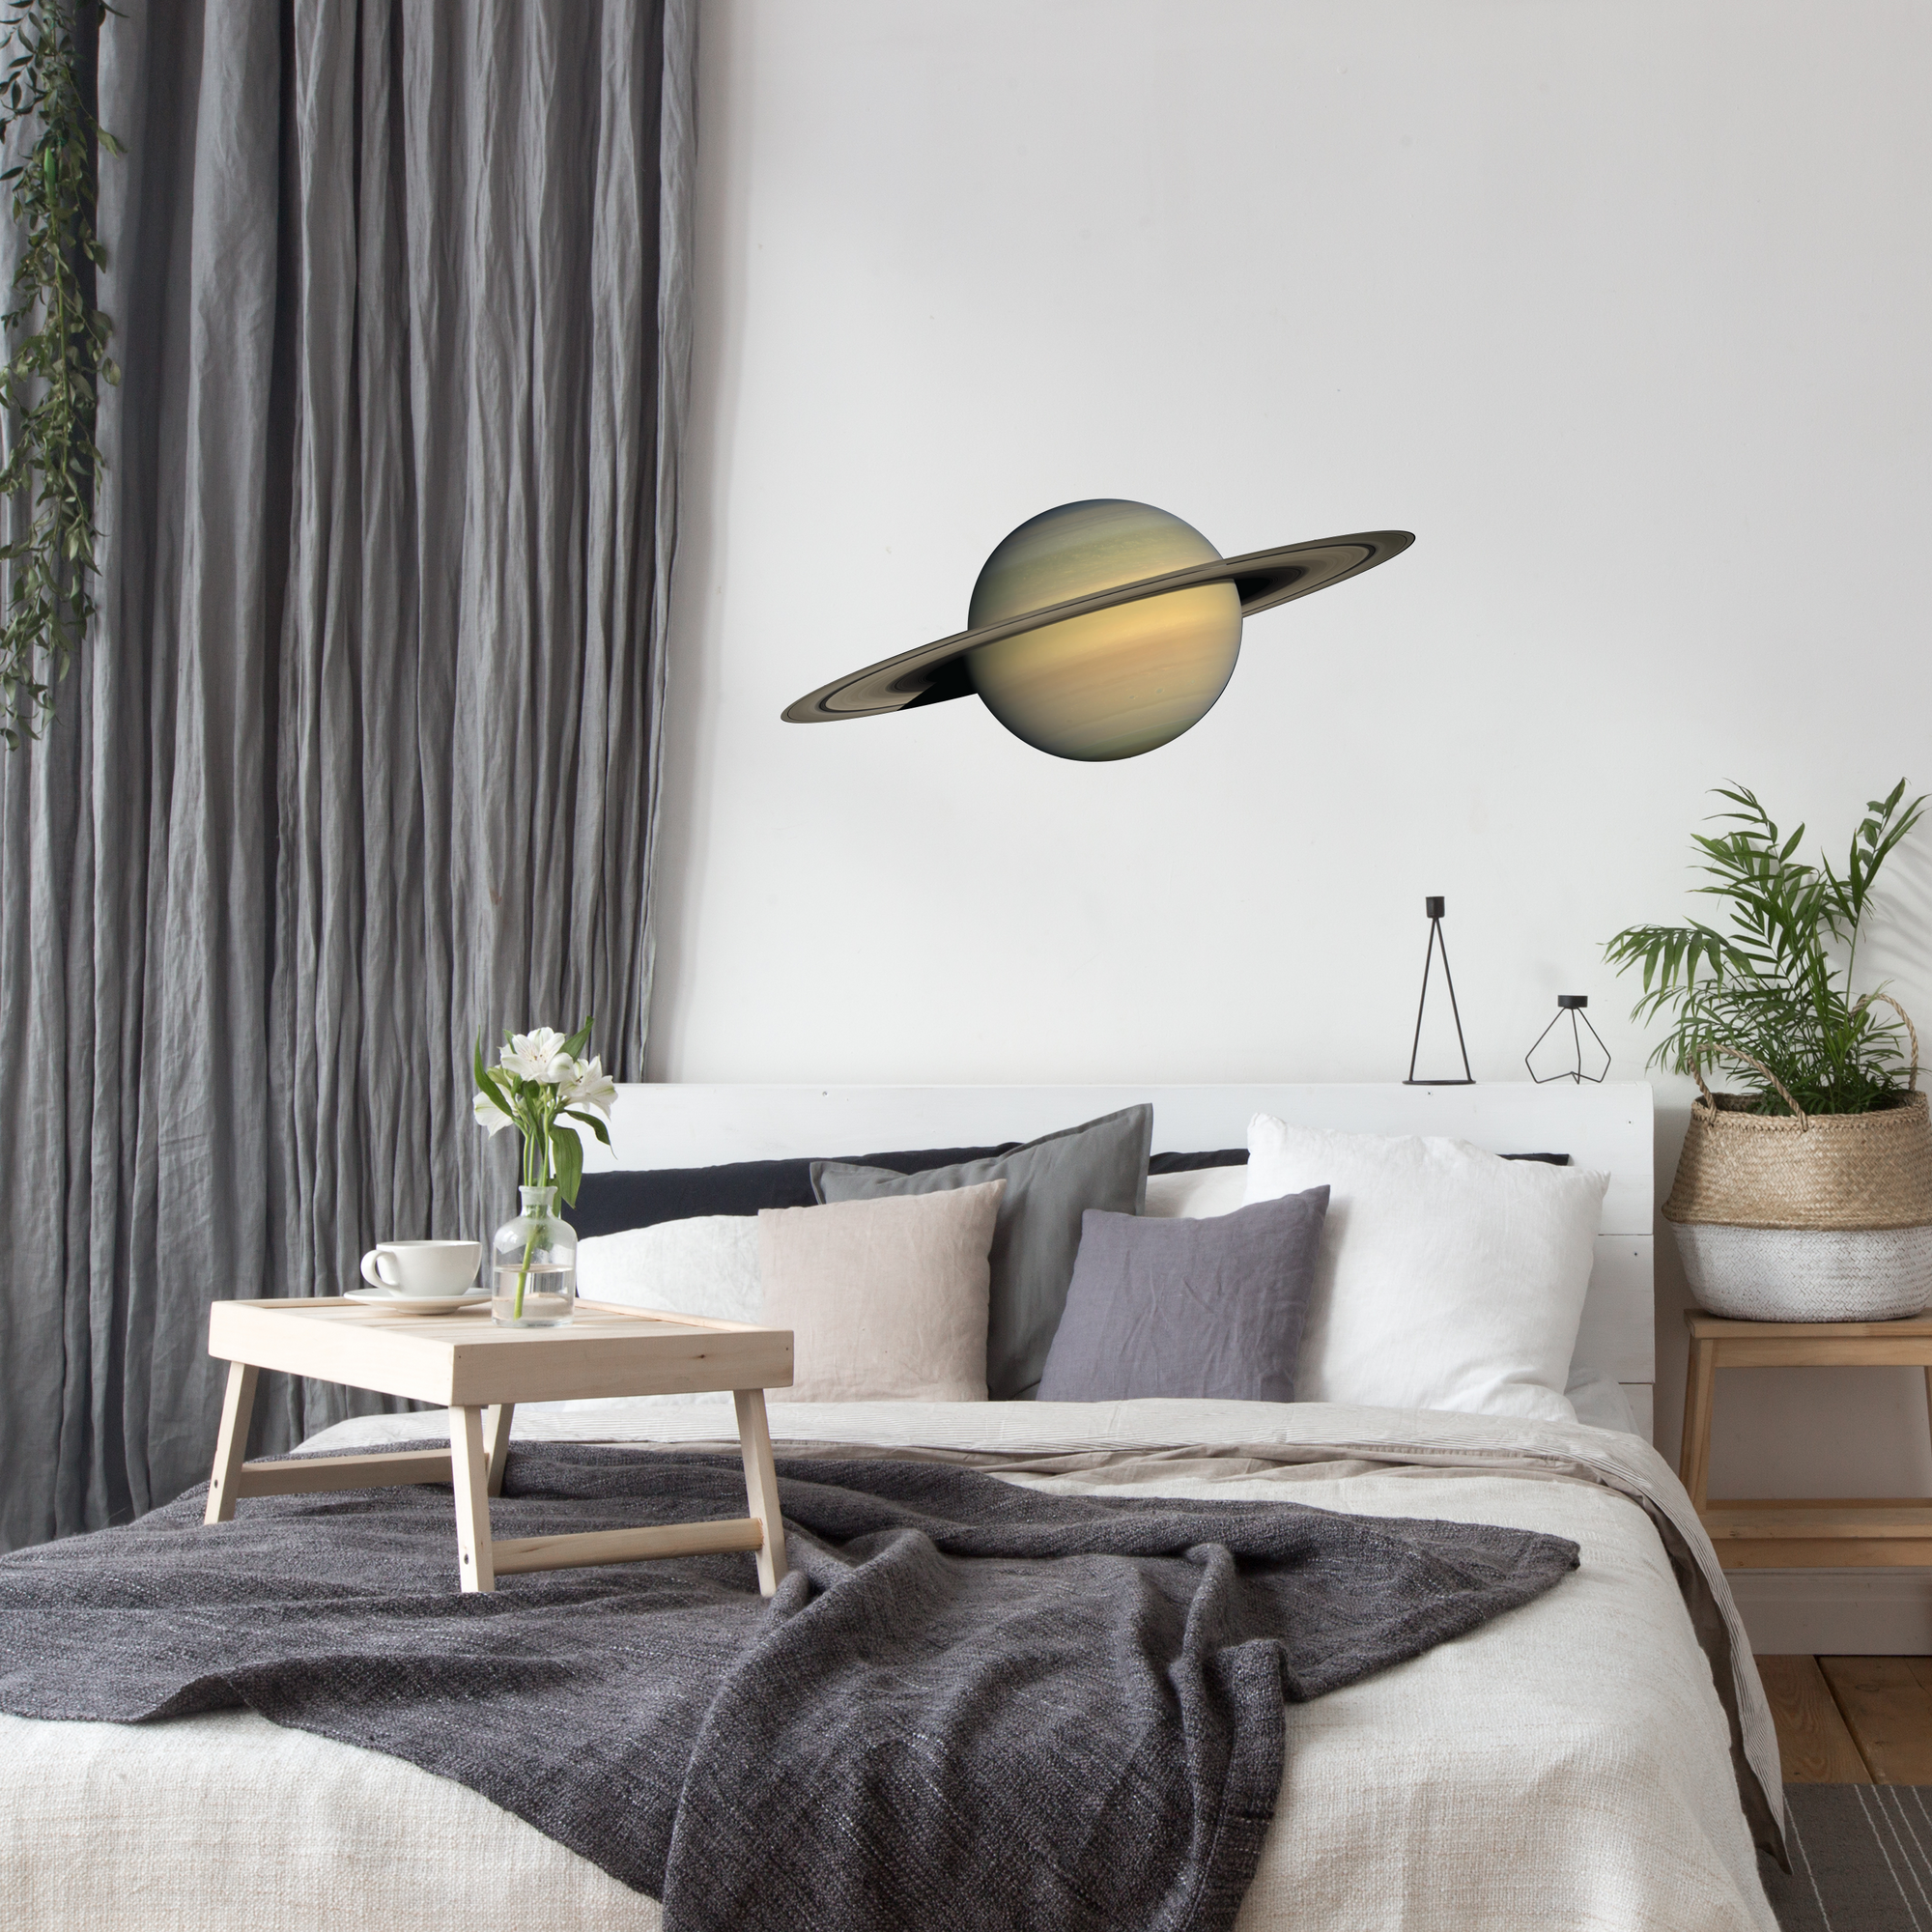 Saturn Wall Decal